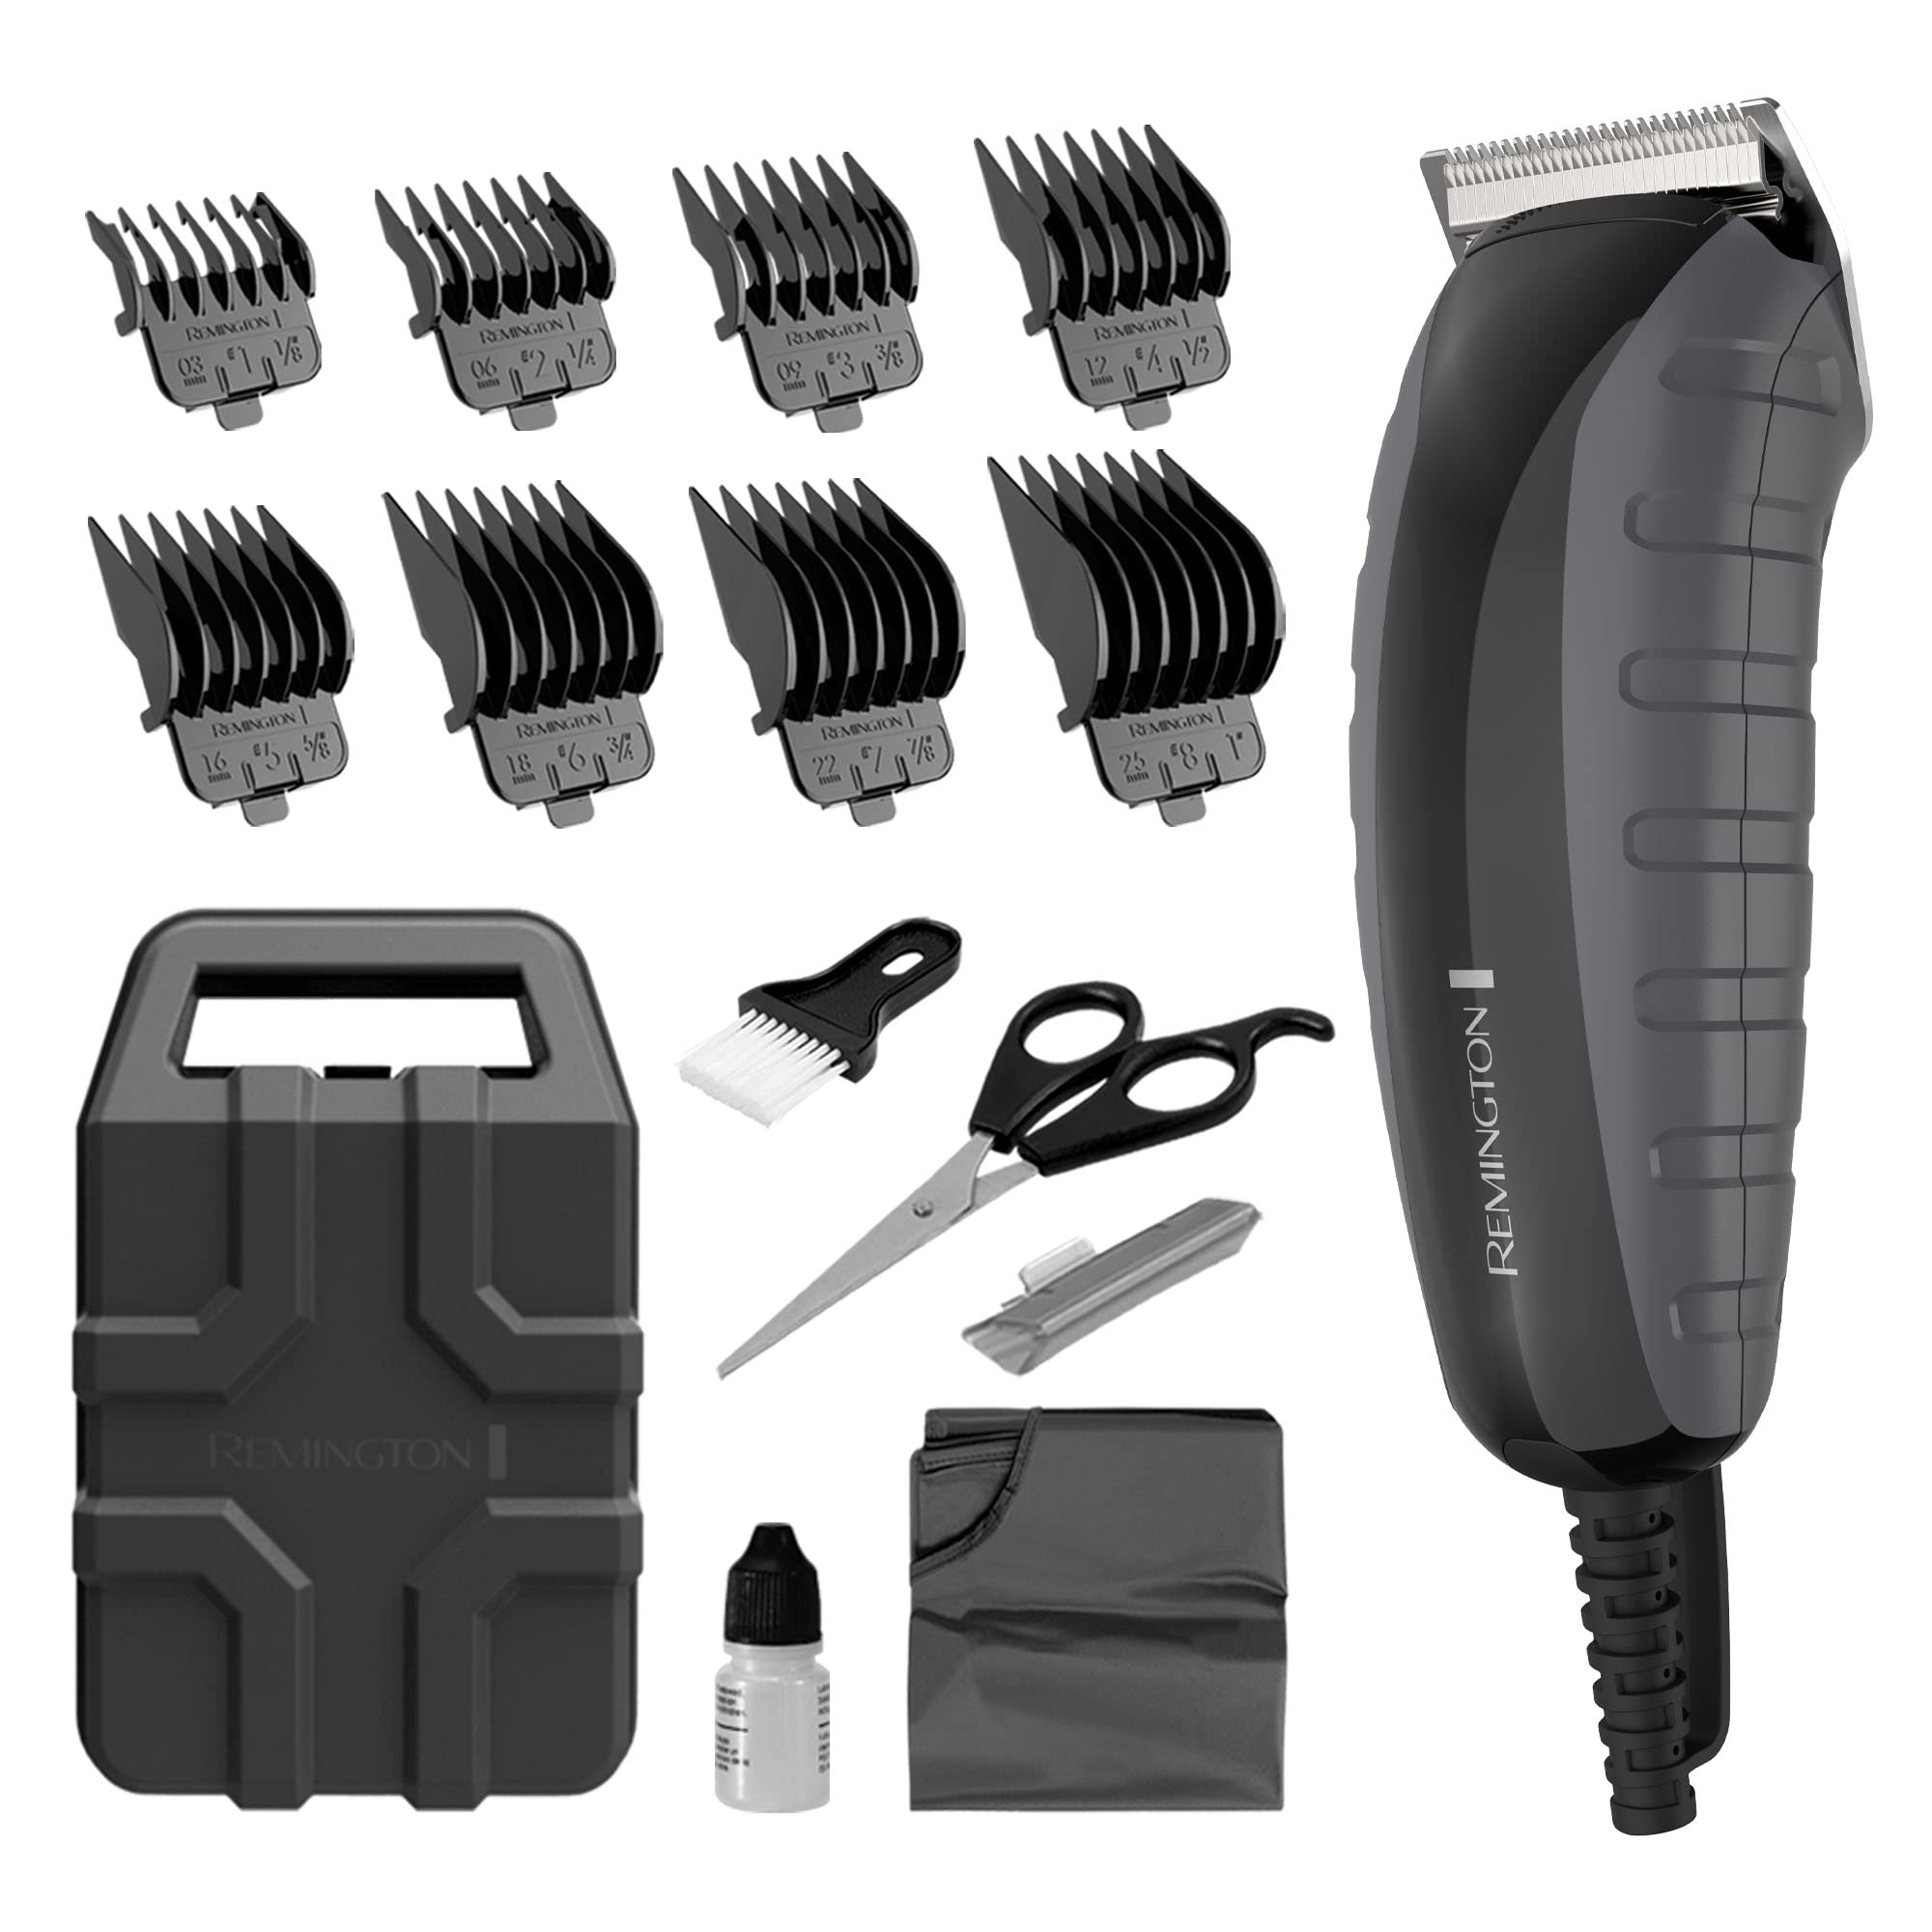 Remington HC5850 Virtually Indestructible Haircut Kit & Beard Trimmer, Hair Clippers for Men, Colors Vary, 15 Piece Set (Pack of 1)